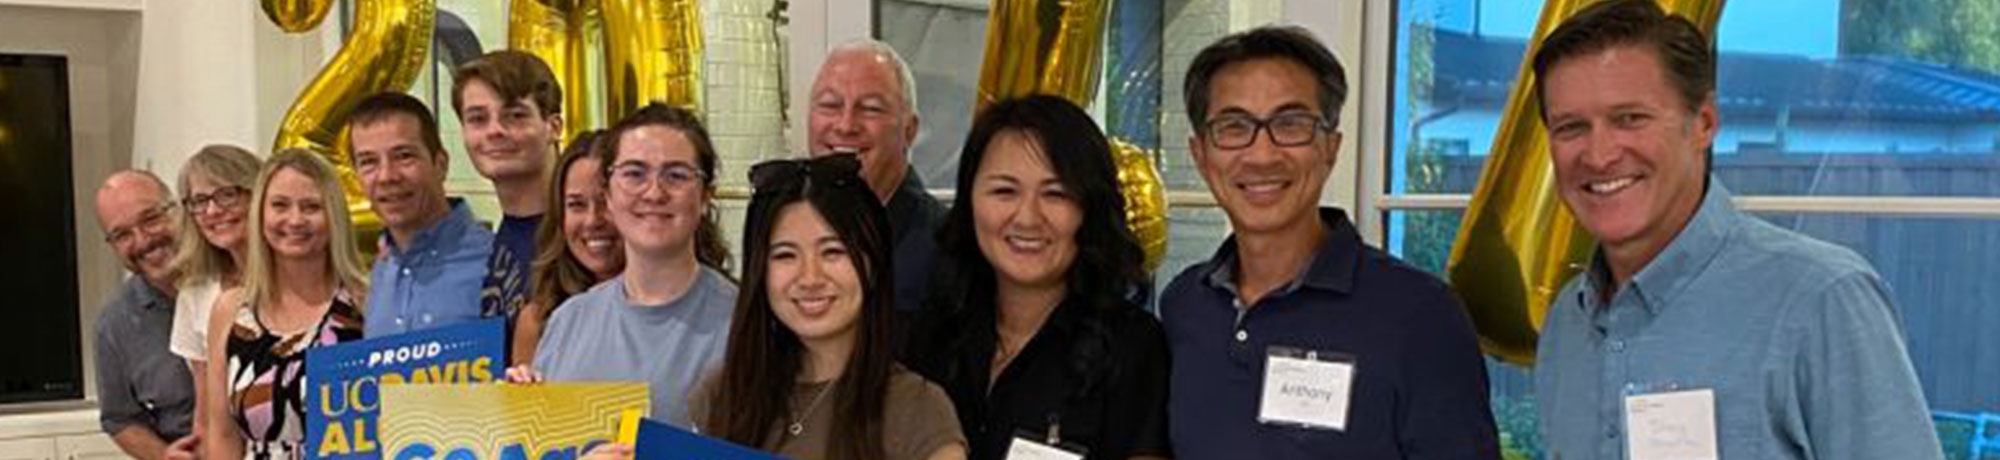 group of uc davis alumni at networking event